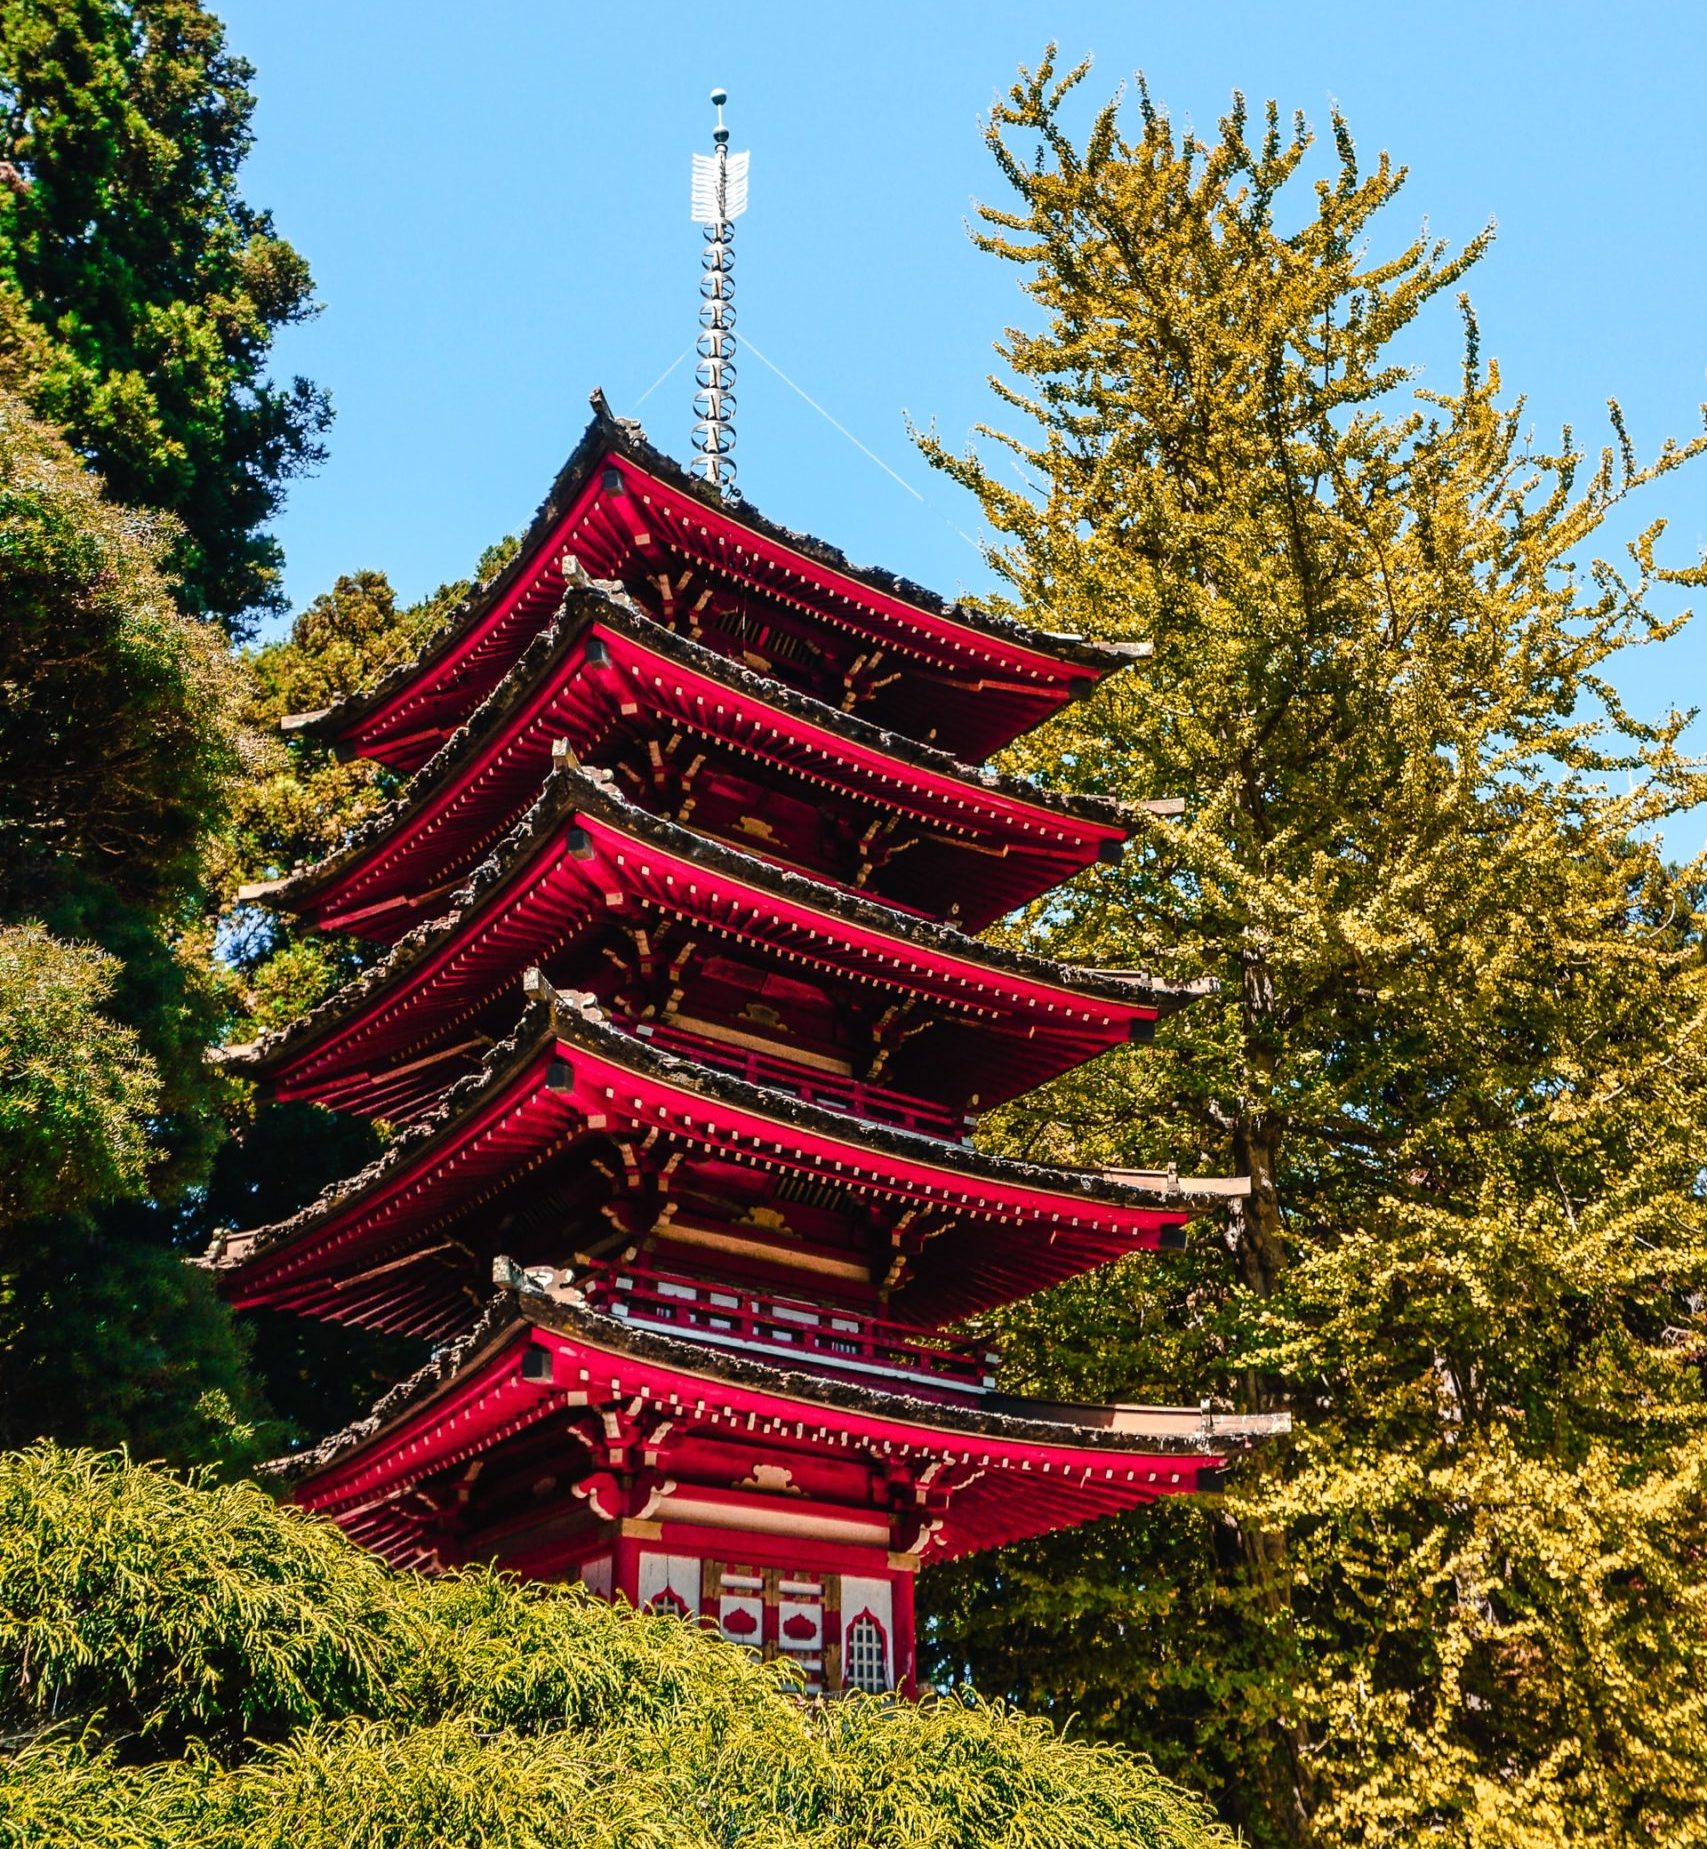 red pagoda at the Japanese Garden, one of several things to do and see in Golden Gate Park